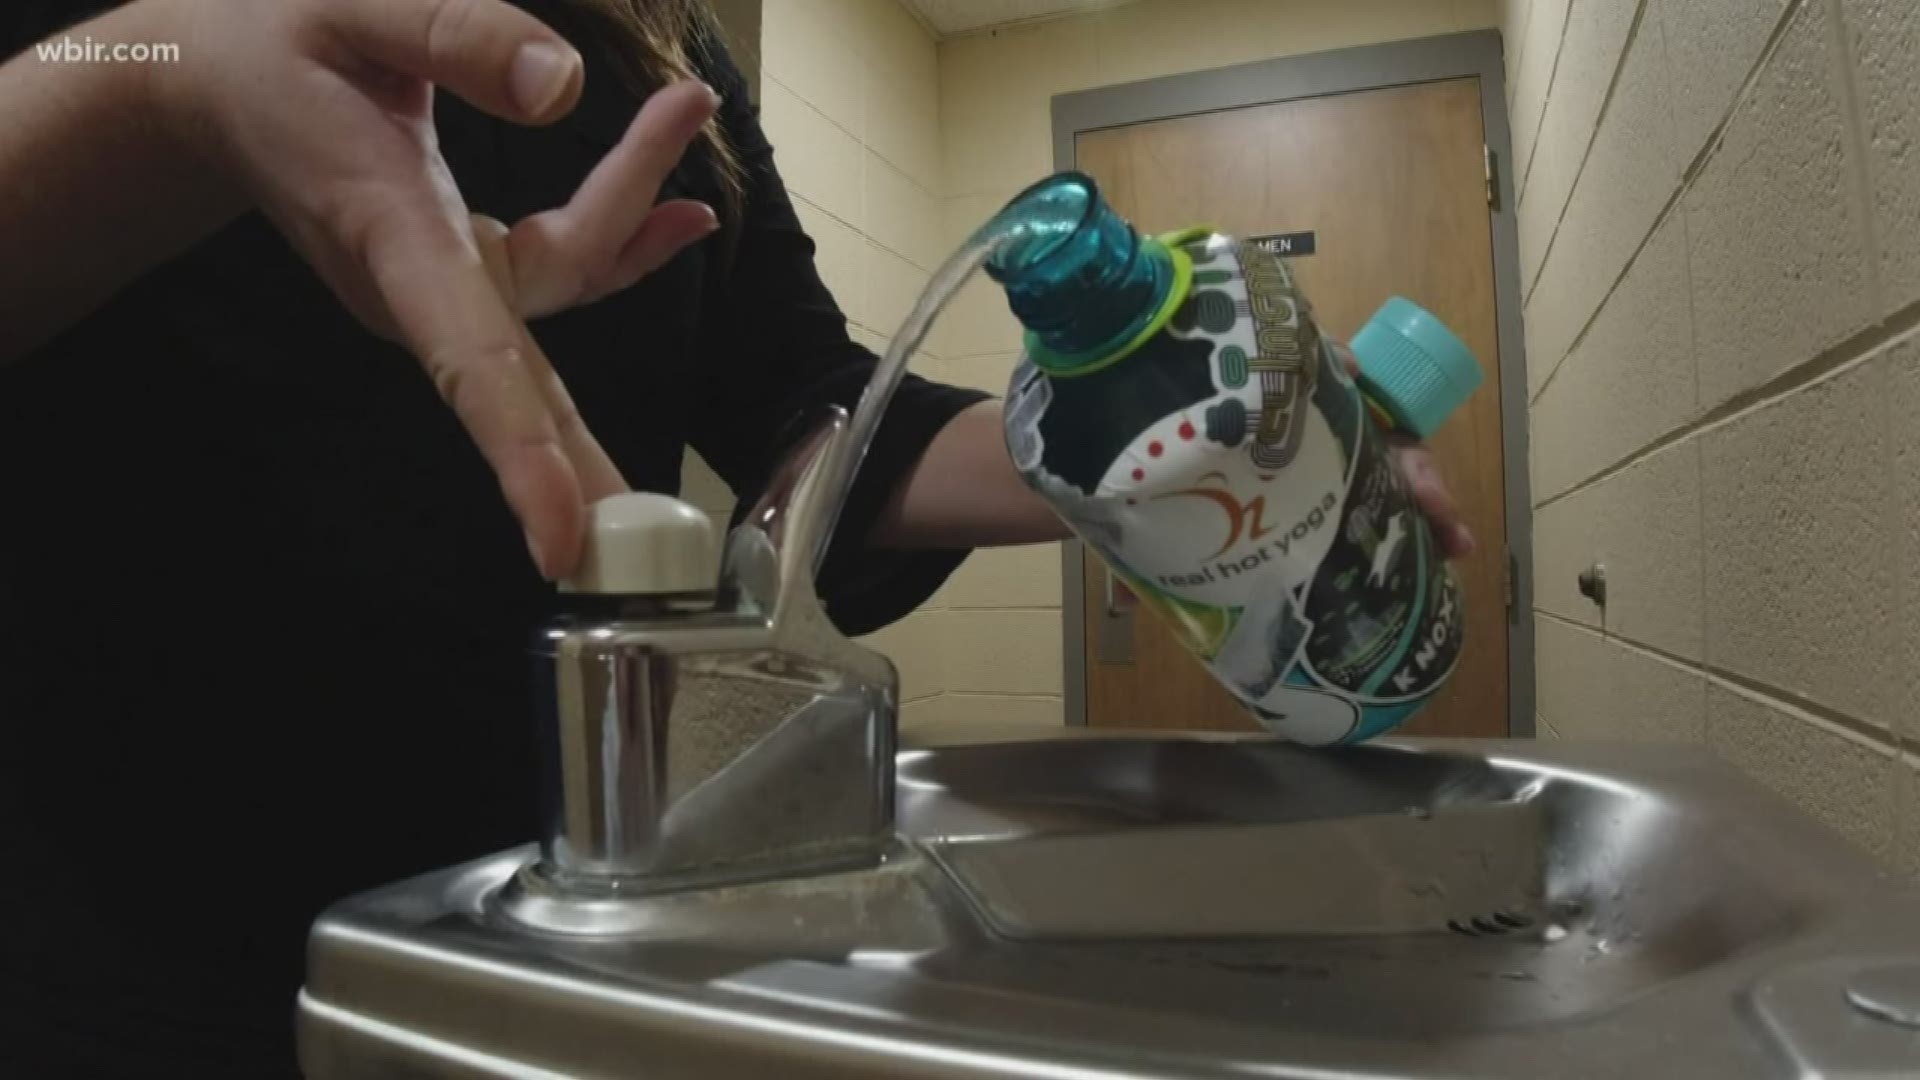 Parents of students at 14 Knox County Schools have been notified their children's school has faucets with lead.